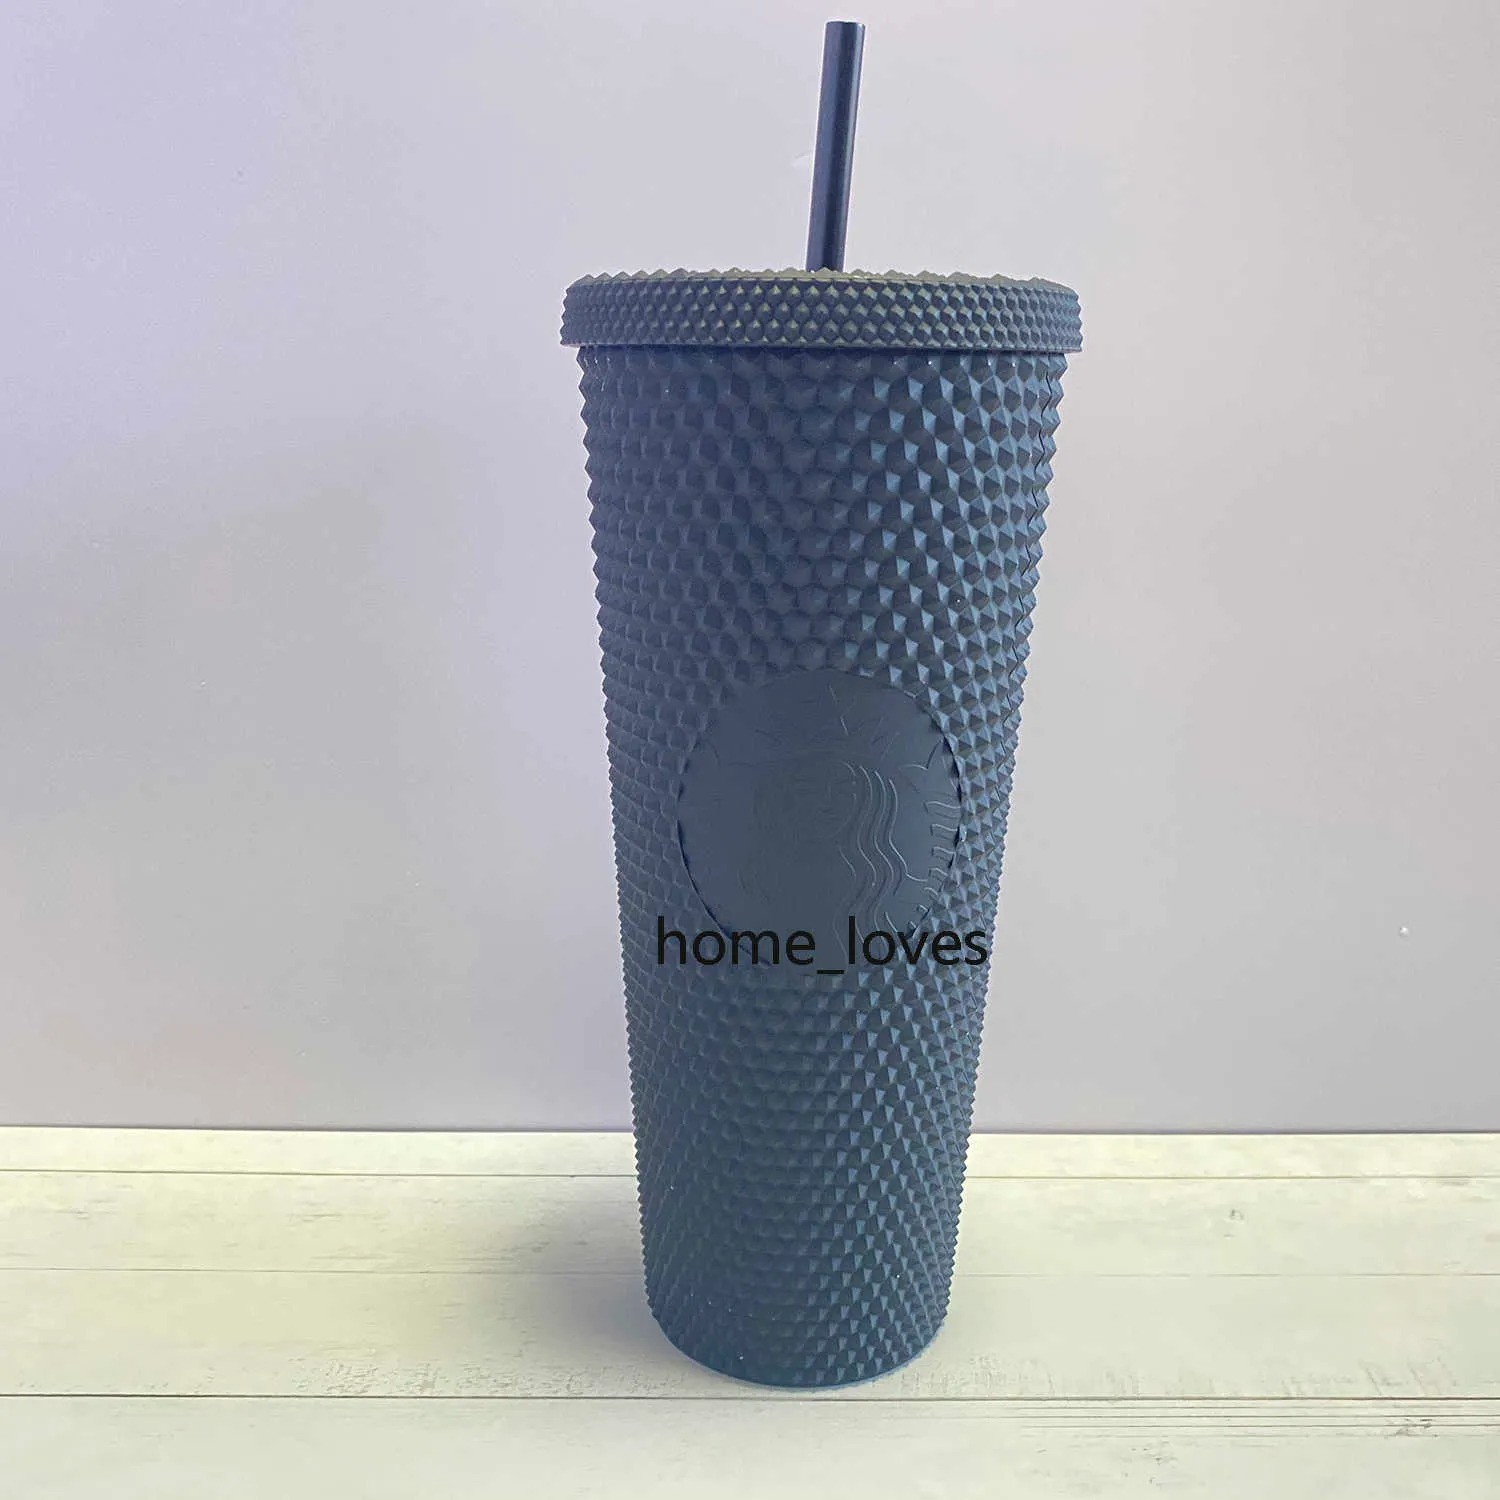 2021 Starbucks Studded Cup Tumblers 710 ml Carbie Pink Matte Black Plastic Mugs With StrawcV2ECV2E302M